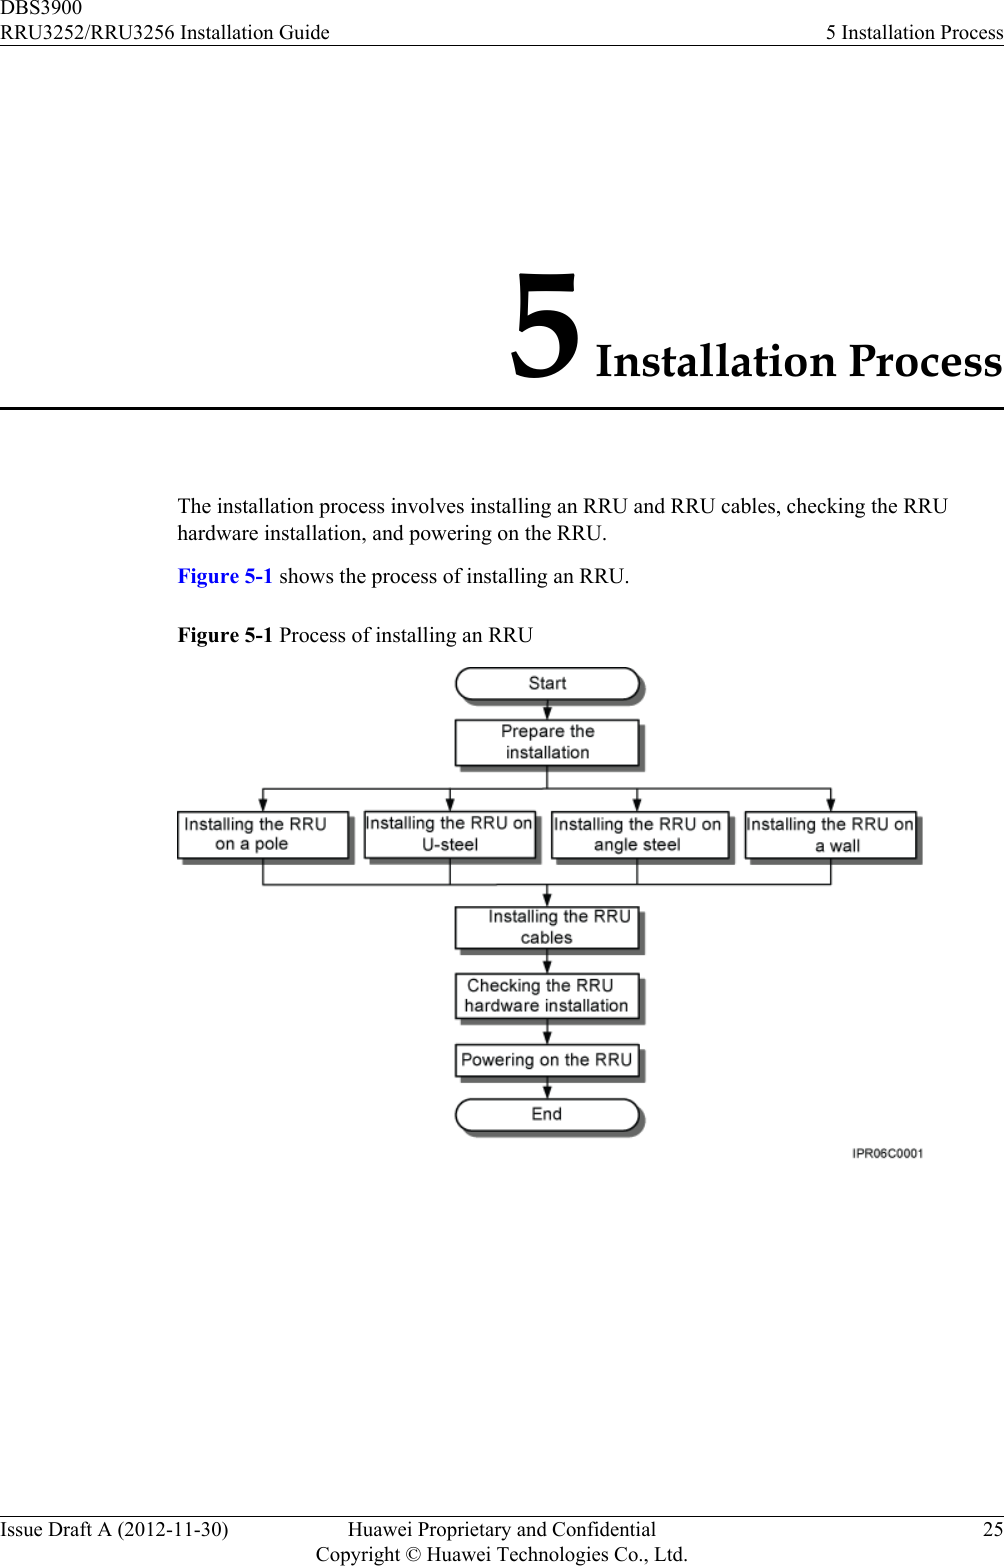 5 Installation ProcessThe installation process involves installing an RRU and RRU cables, checking the RRUhardware installation, and powering on the RRU.Figure 5-1 shows the process of installing an RRU.Figure 5-1 Process of installing an RRUDBS3900RRU3252/RRU3256 Installation Guide 5 Installation ProcessIssue Draft A (2012-11-30) Huawei Proprietary and ConfidentialCopyright © Huawei Technologies Co., Ltd.25